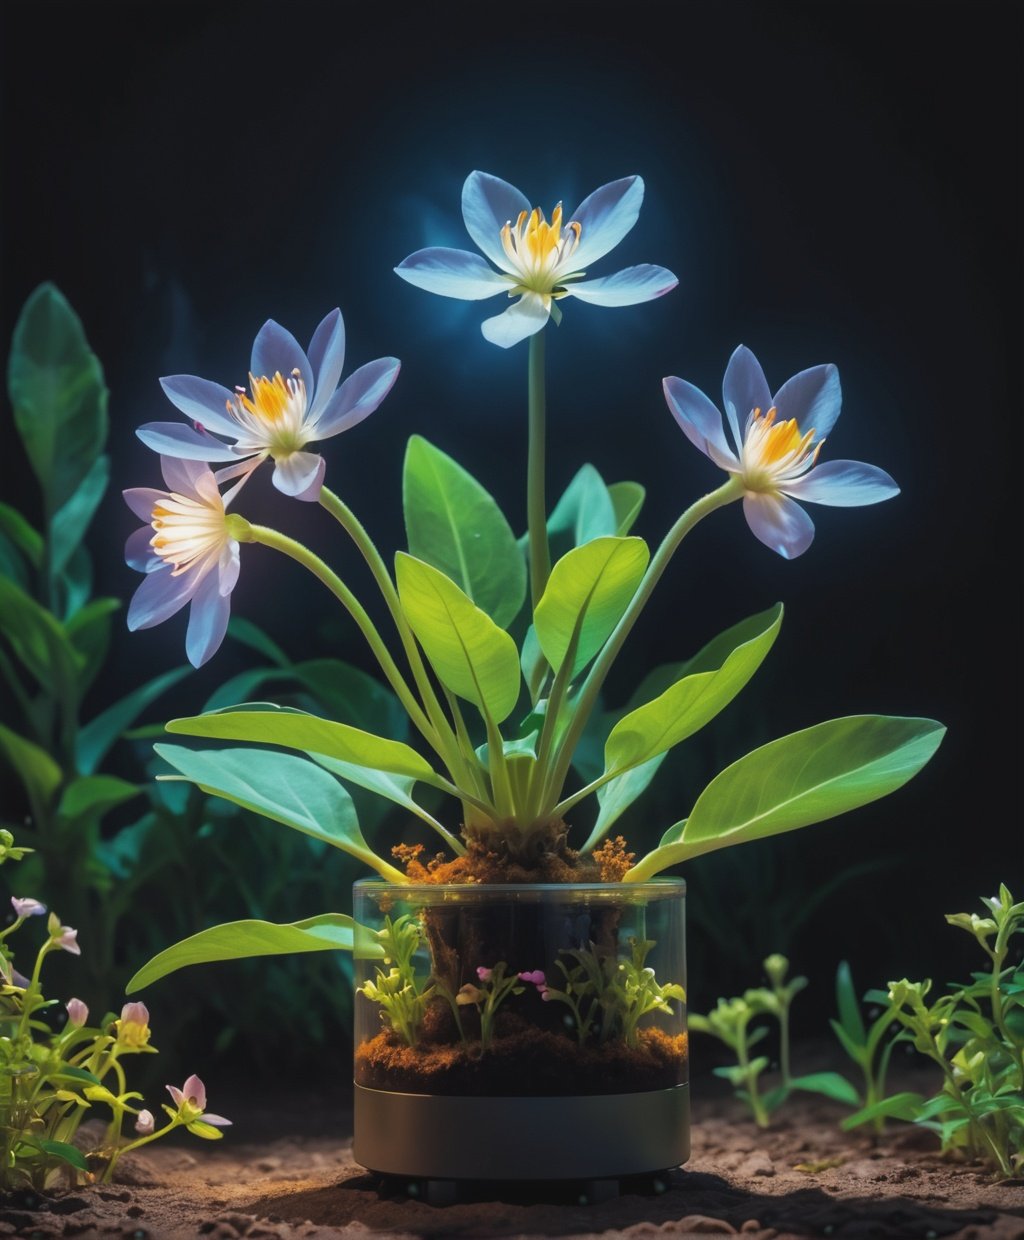 In this world, there is a magical plant that blooms only on the night of the full moon, Nixie tube, use filter photography, photo grade, 16k, hyper quality